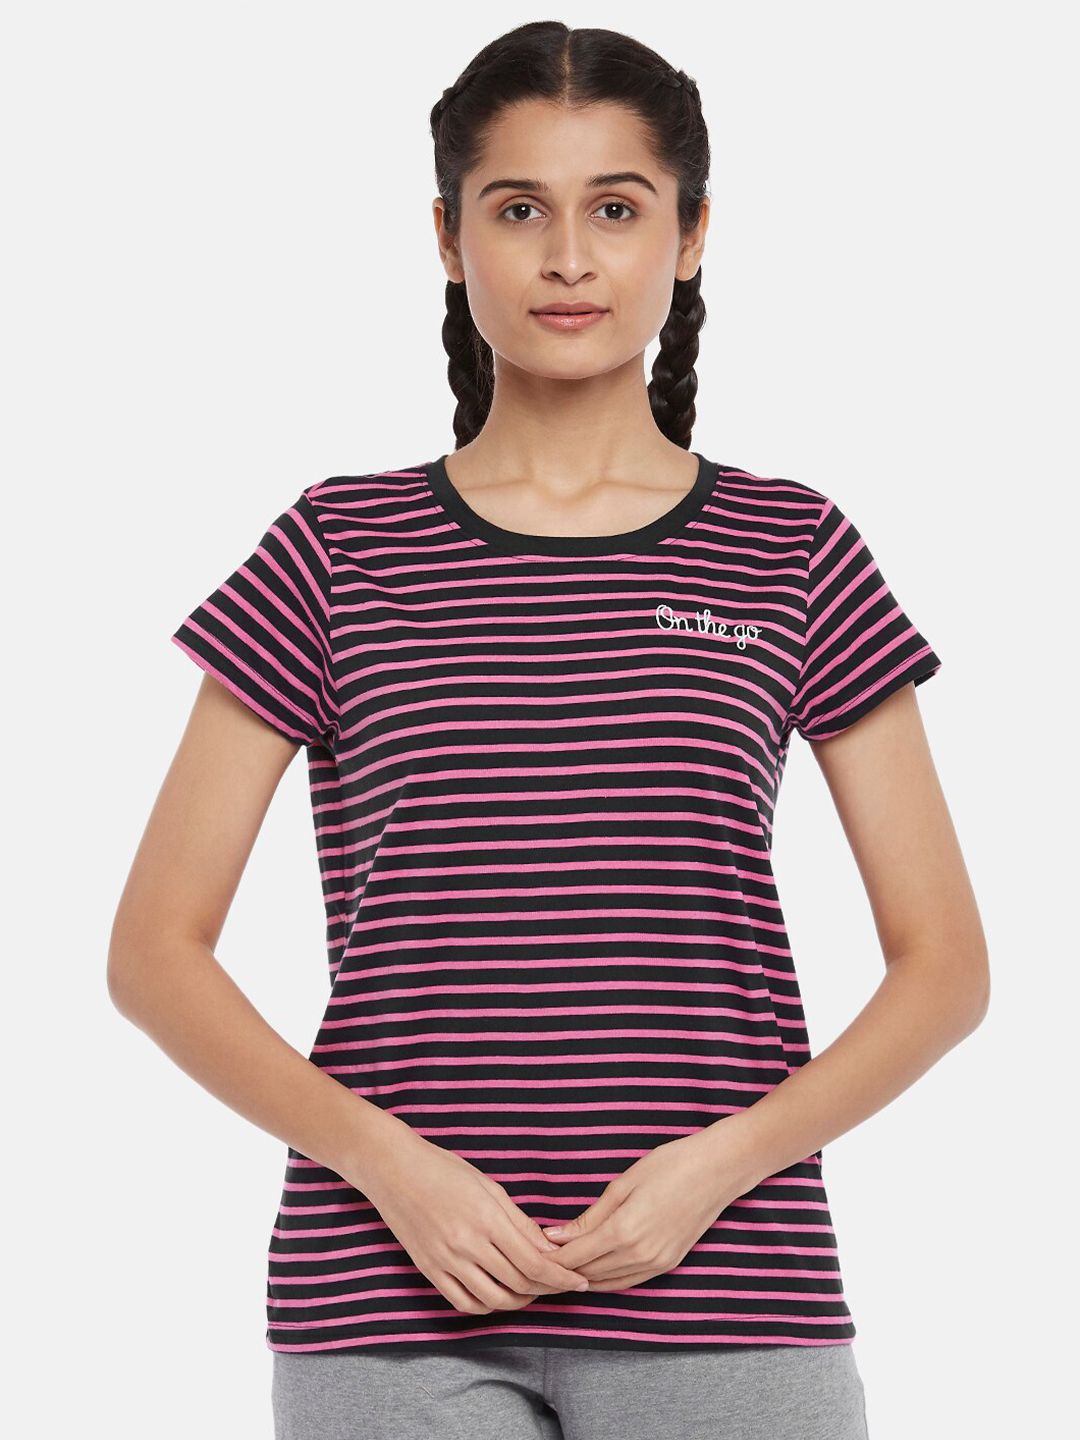 Ajile by Pantaloons Women Black Striped Pure Cotton T-shirt Price in India